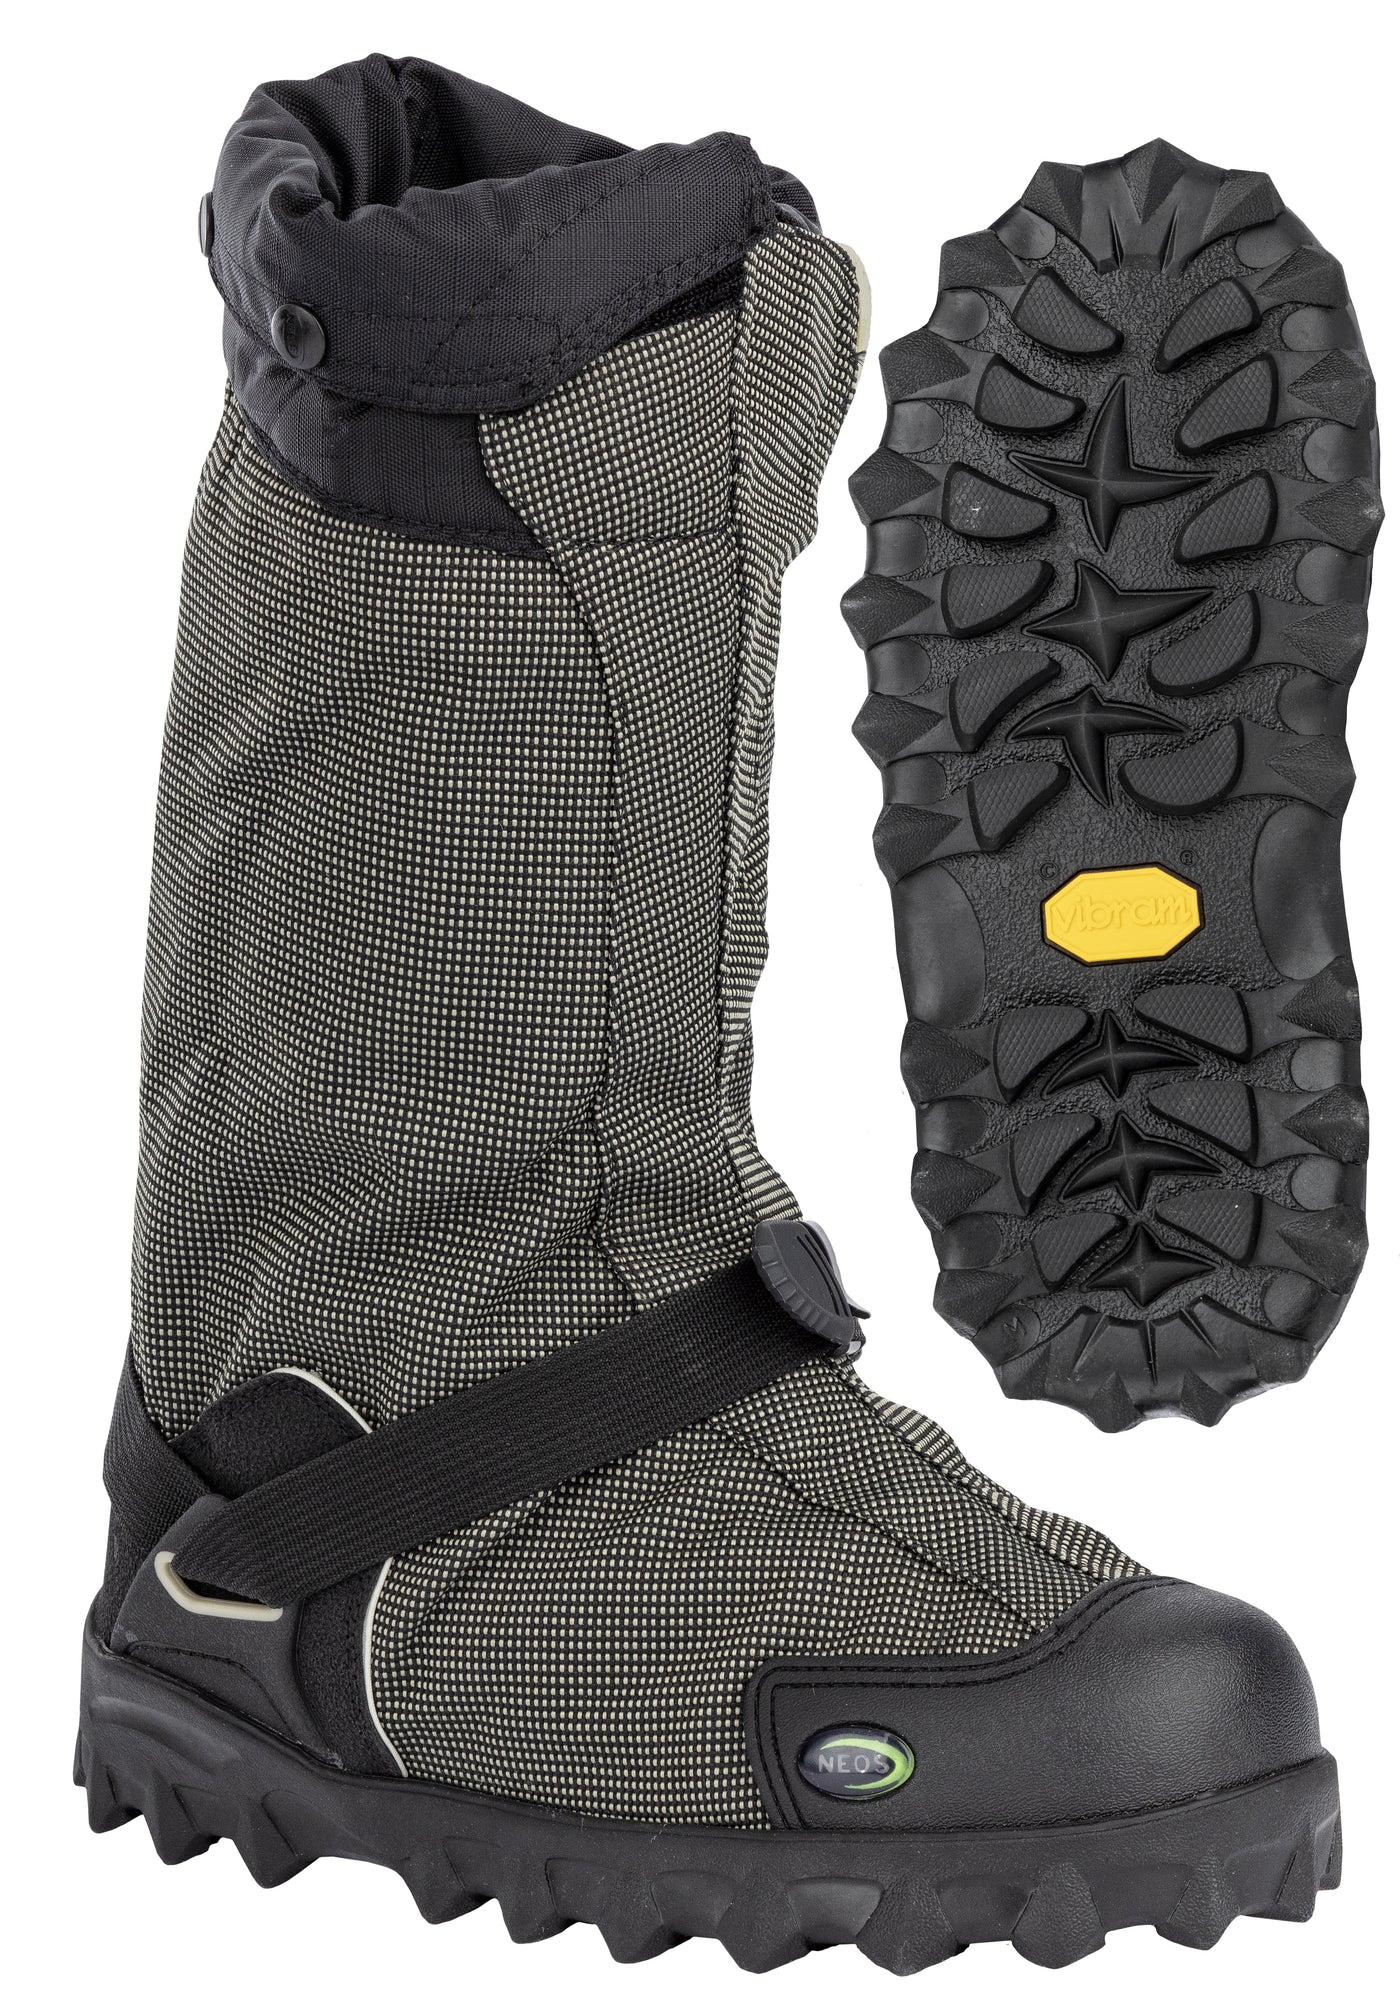 Insulated shoe covers: NEOS NAVIGATOR 5